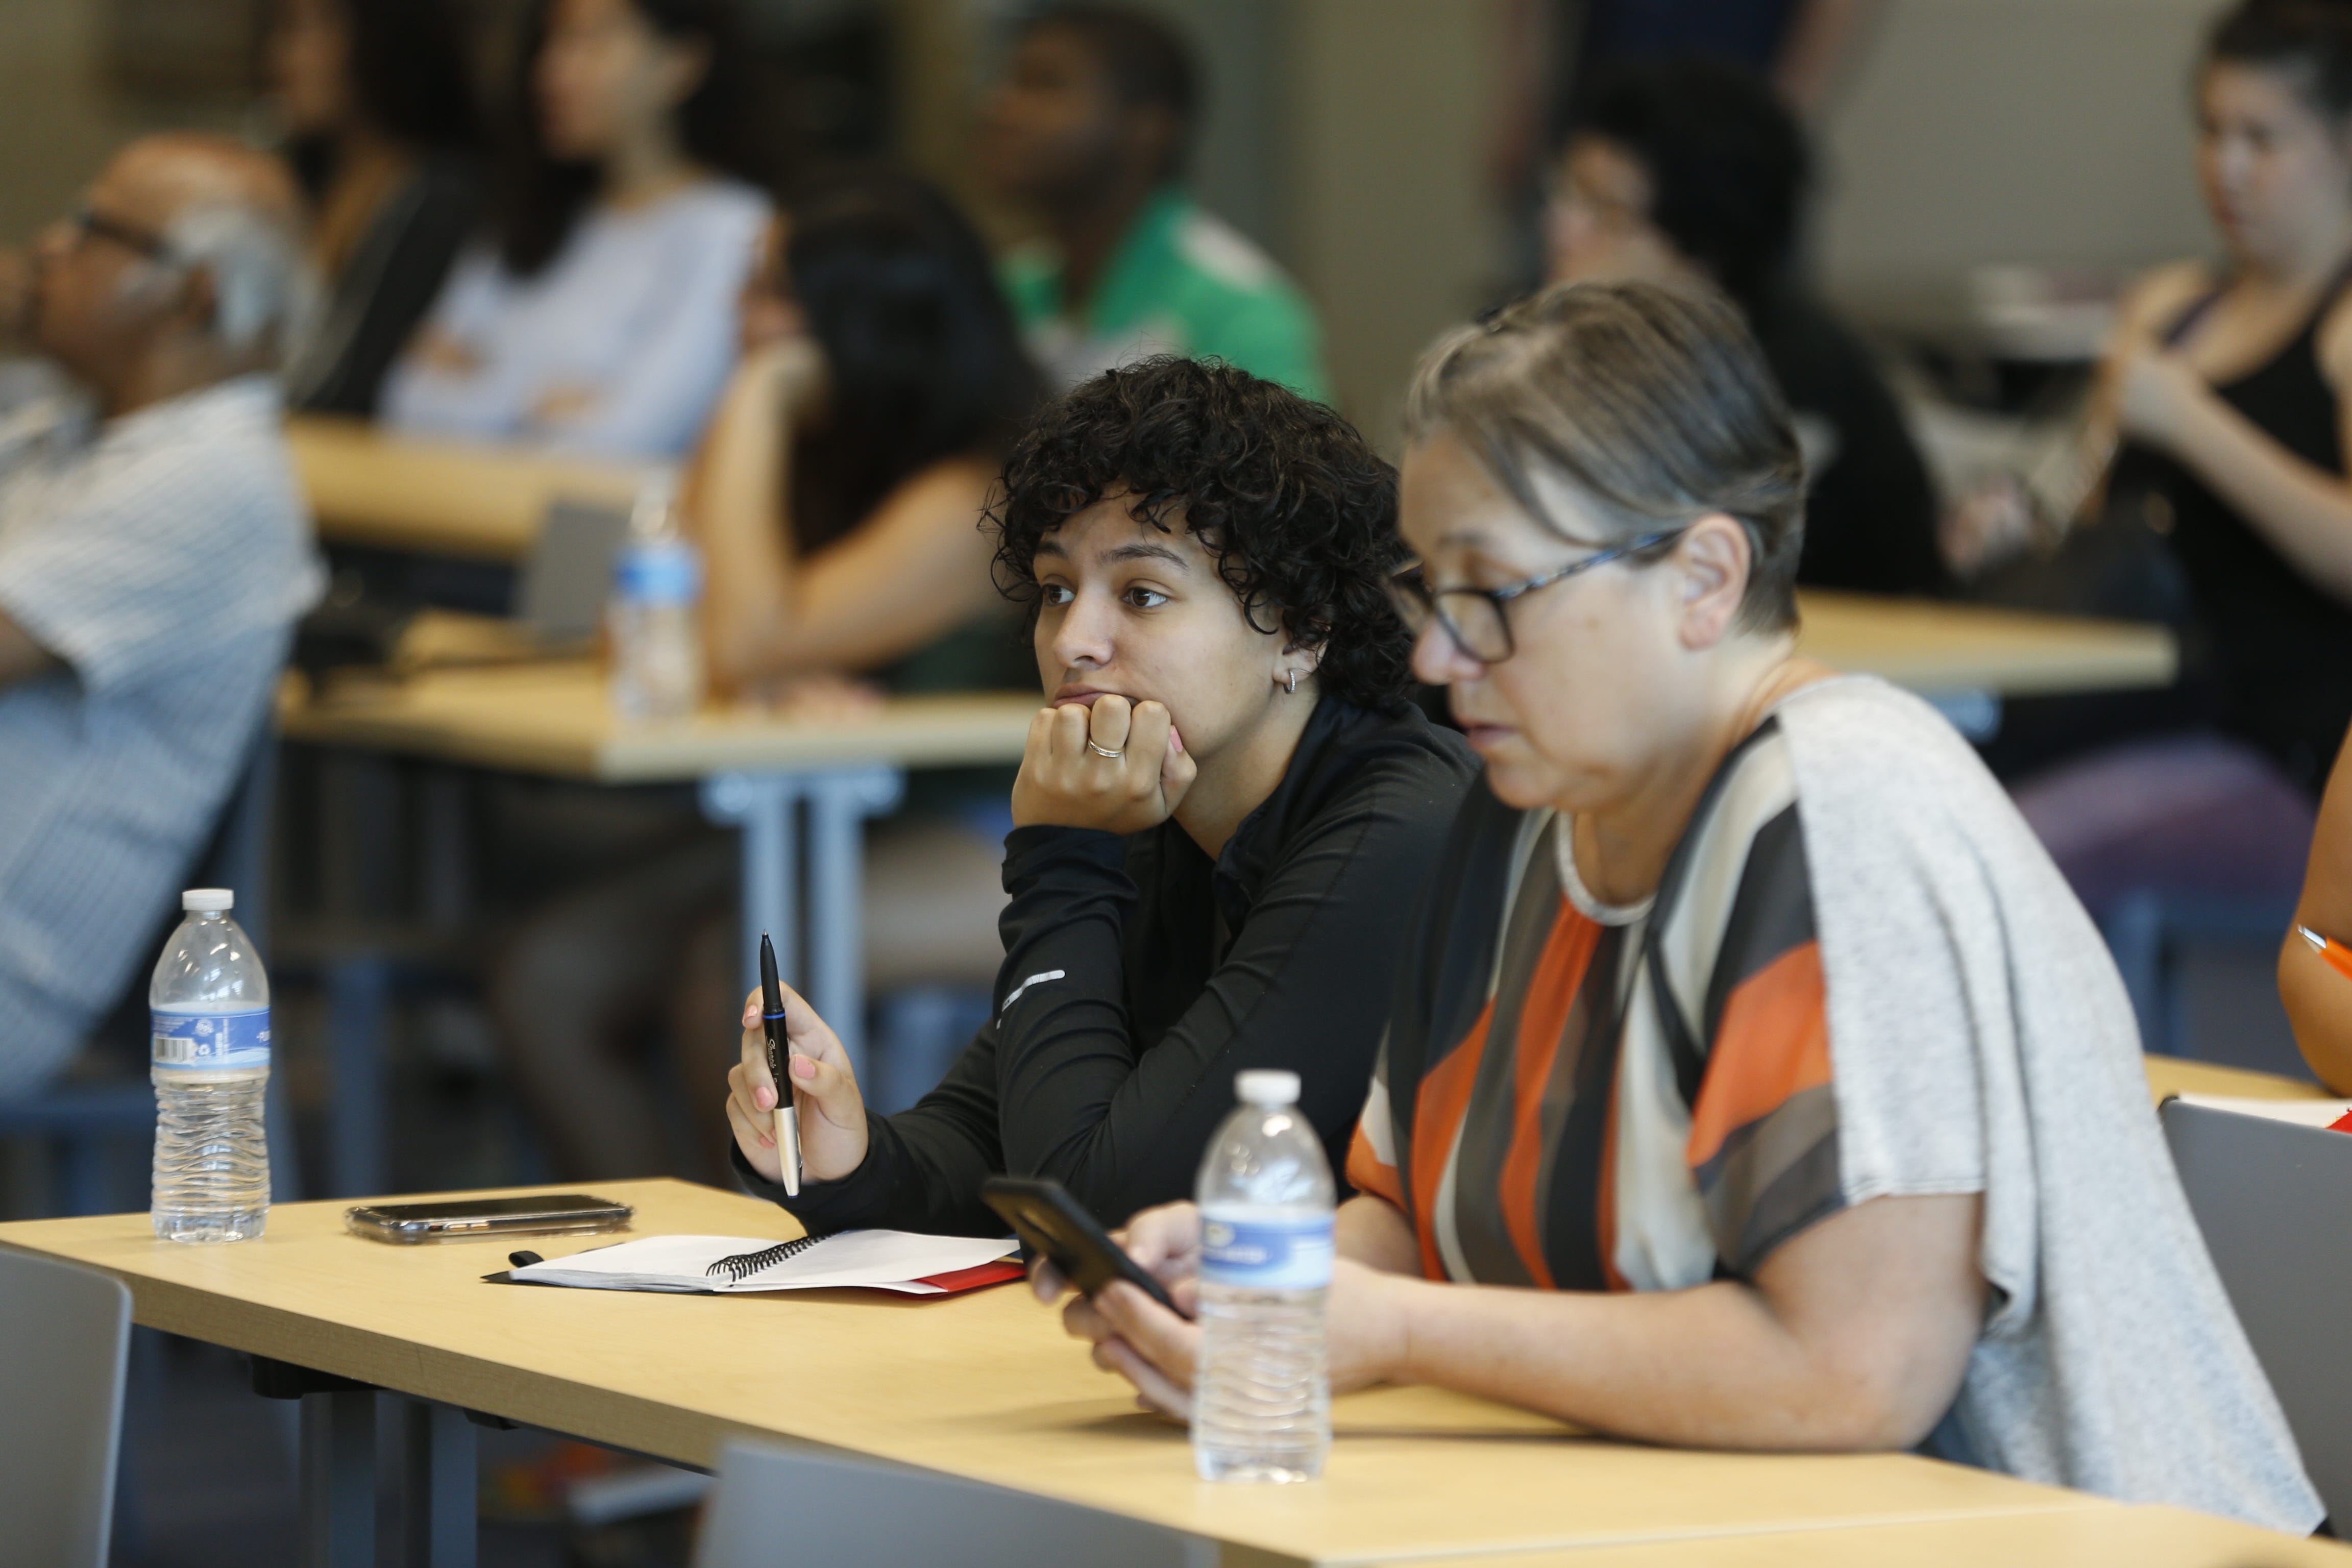 Students and parents attend a lecture helping with understanding the financial side of college during a College Depot event at the Burton Barr Phoenix Public Library in Phoenix on July 20, 2019.